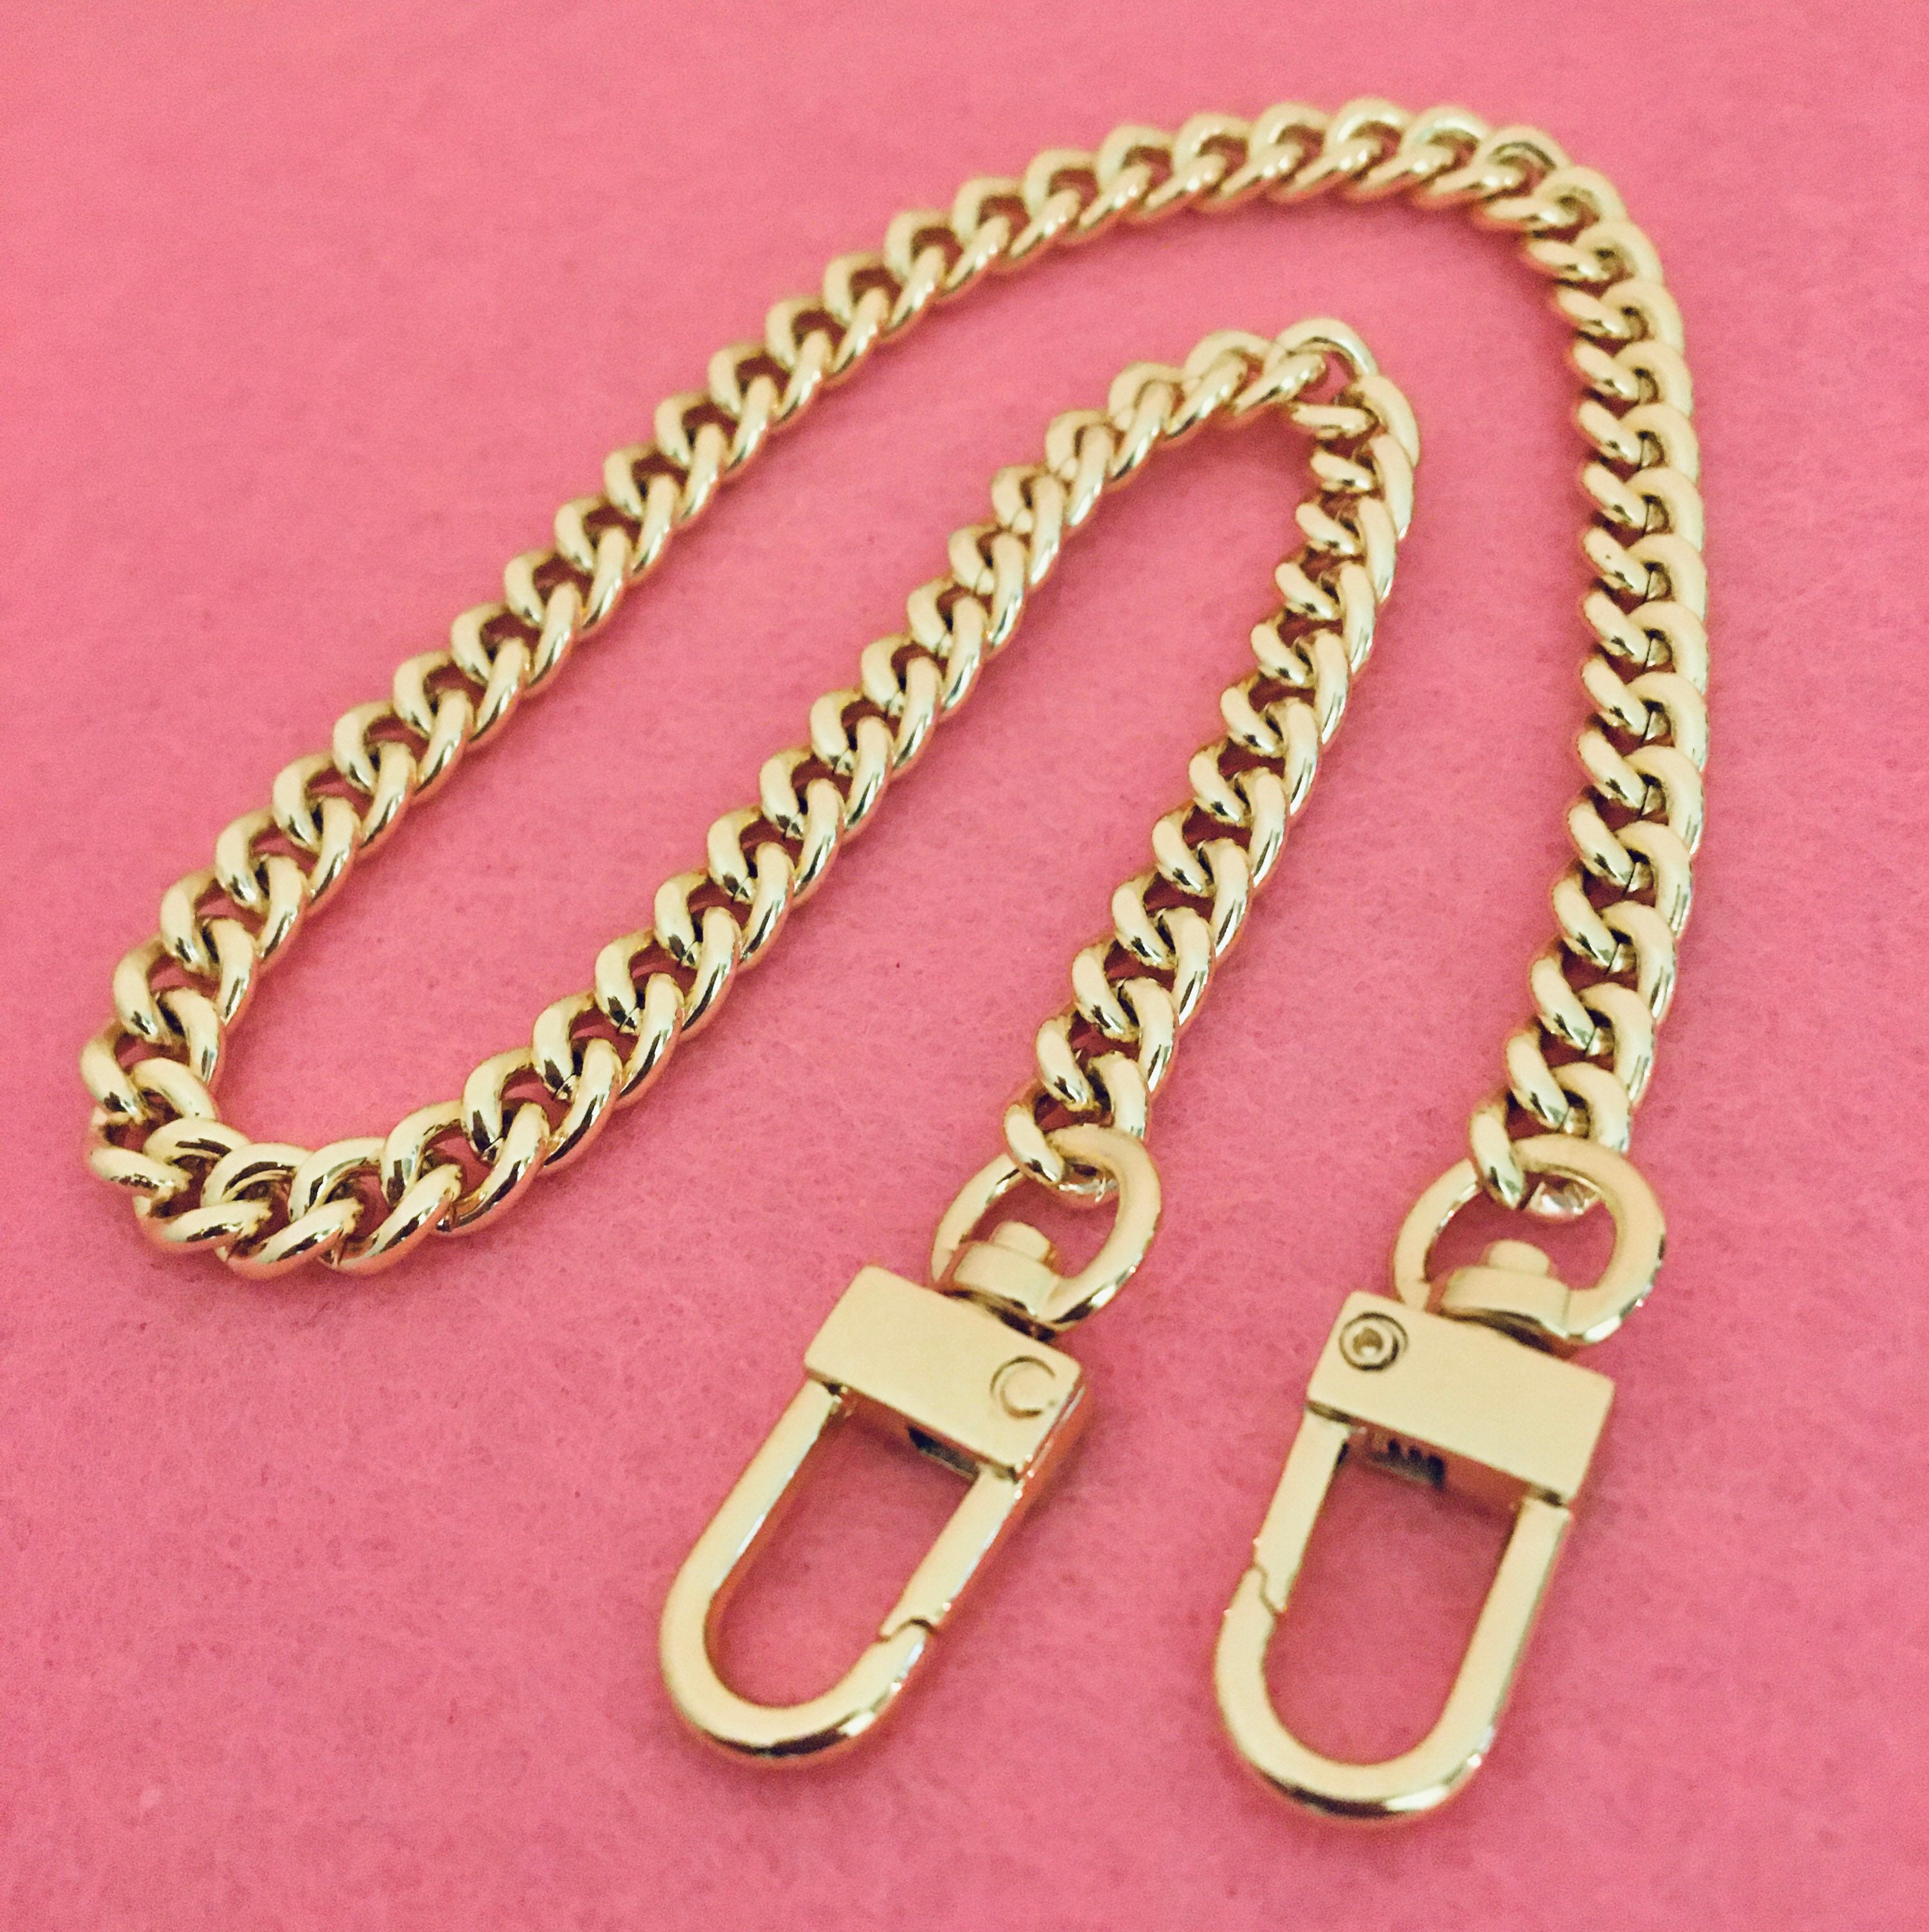 gold link chain for lv purse